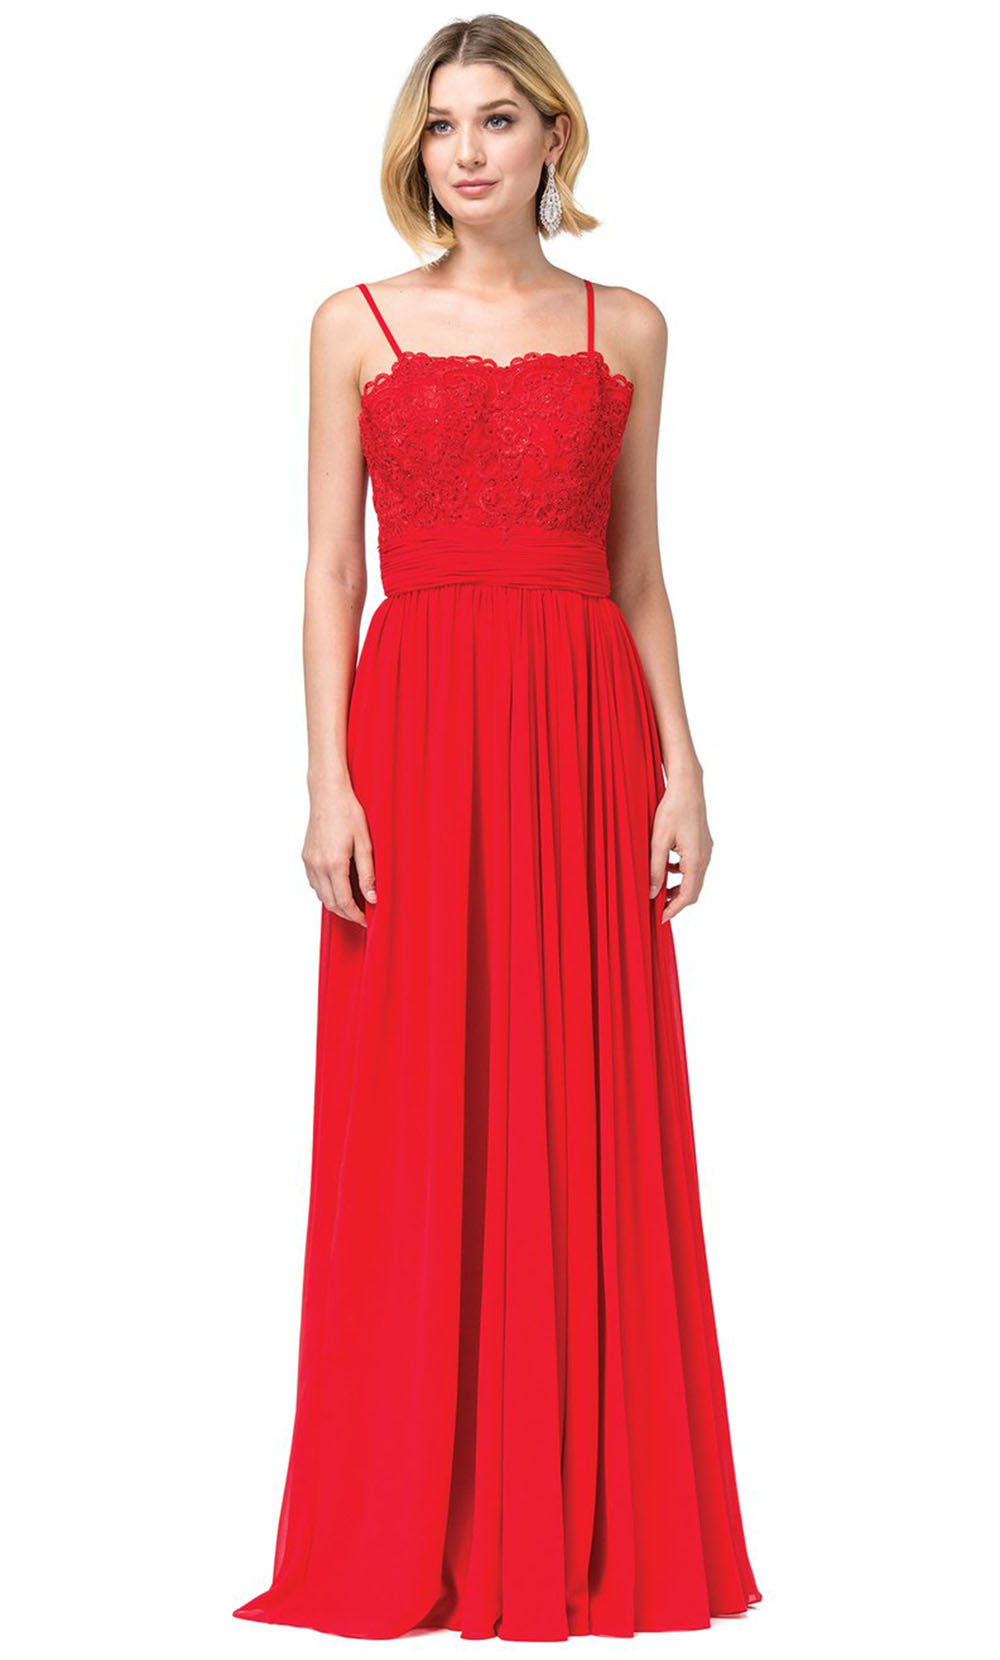 Dancing Queen - 2789 Sleeveless Lace Bodice Slit A-Line Gown In Red